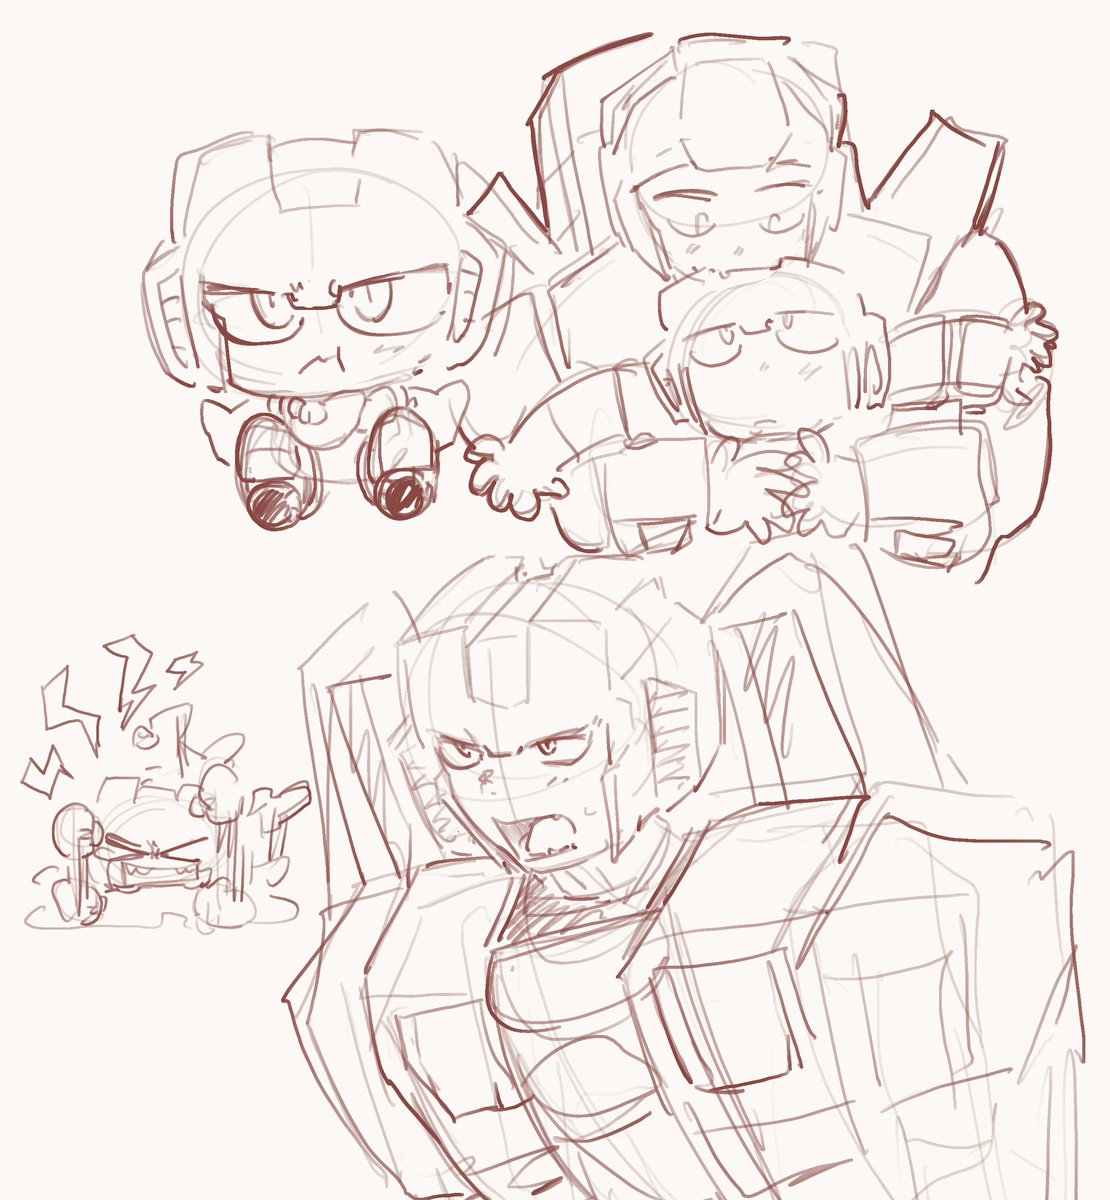 Starscream doodles,, chat i miss drawing,,,